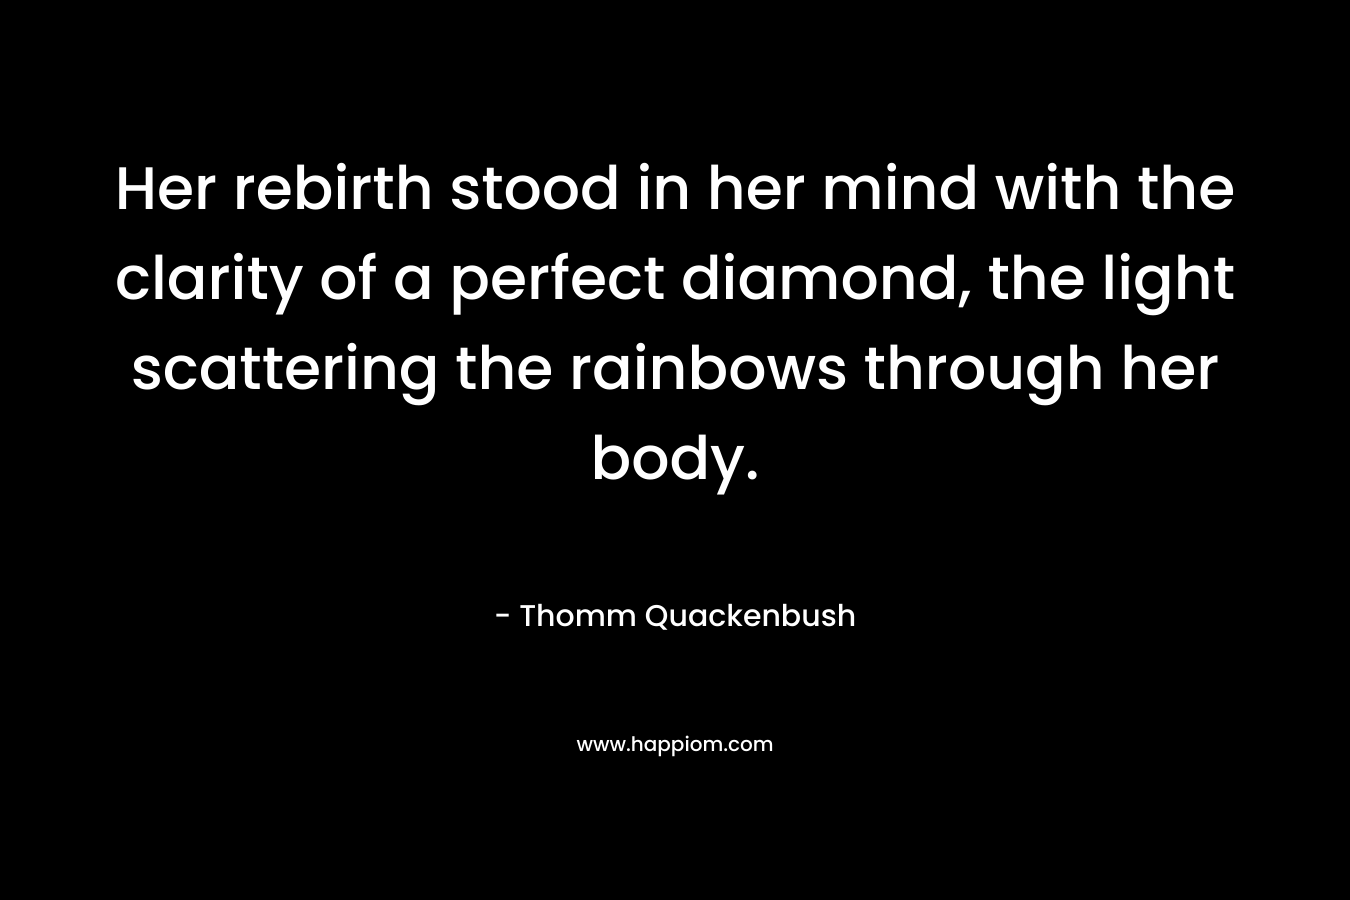 Her rebirth stood in her mind with the clarity of a perfect diamond, the light scattering the rainbows through her body. – Thomm Quackenbush